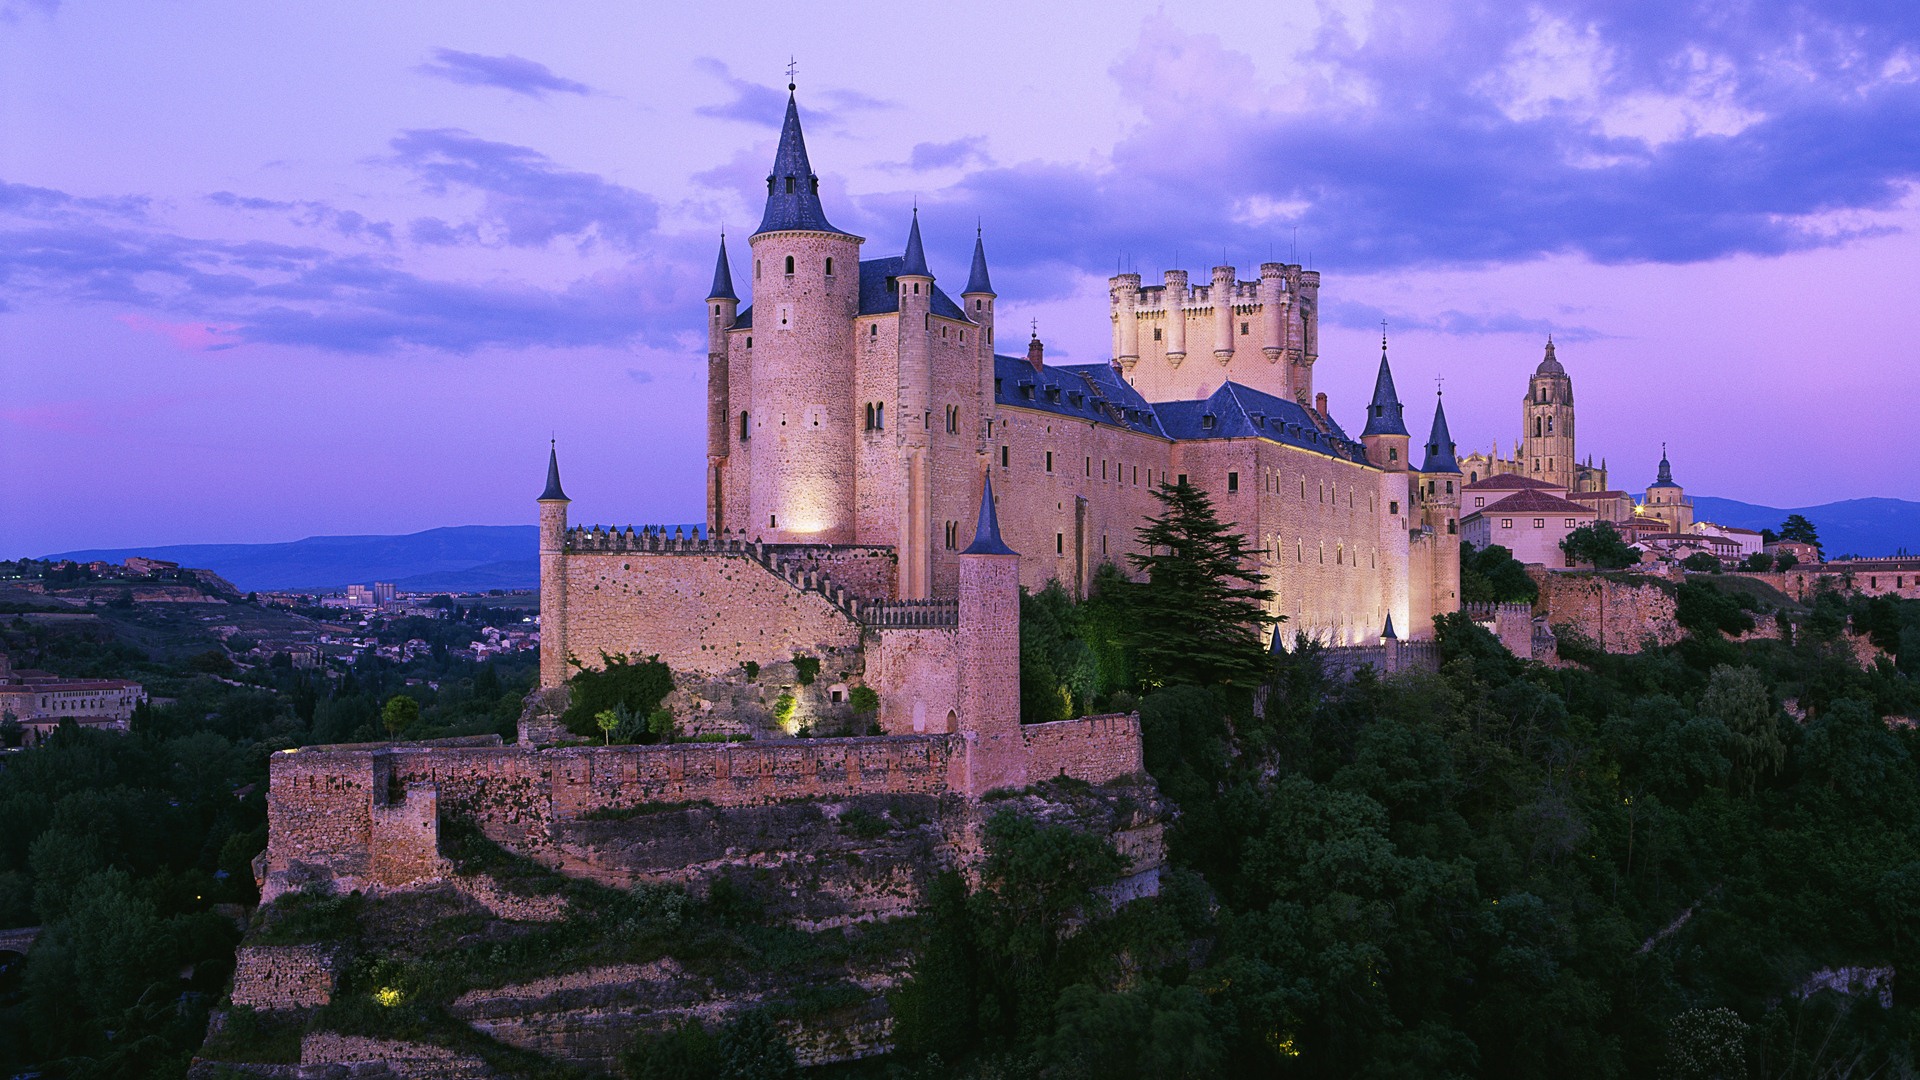 Windows 7 Wallpapers: Castles of Europe #1 - 1920x1080